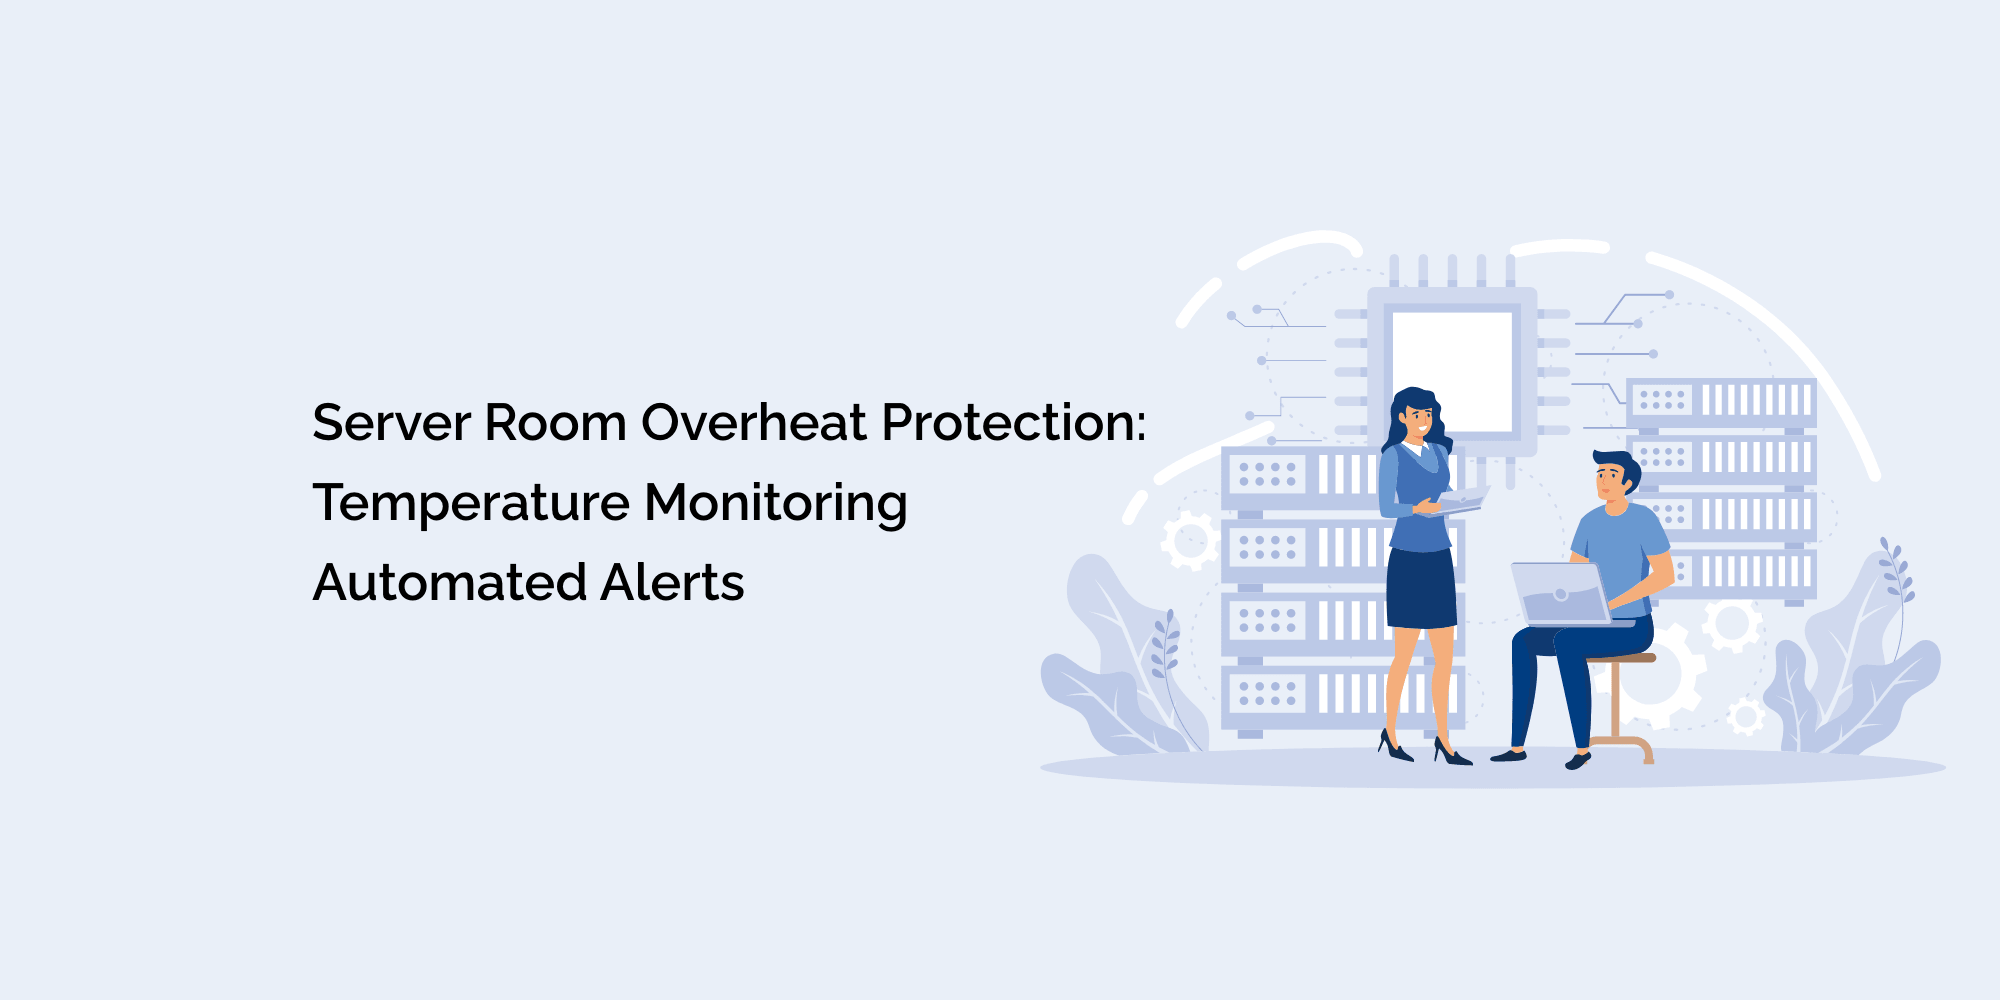 Server Room Overheat Protection: Temperature Monitoring + Automated Alerts